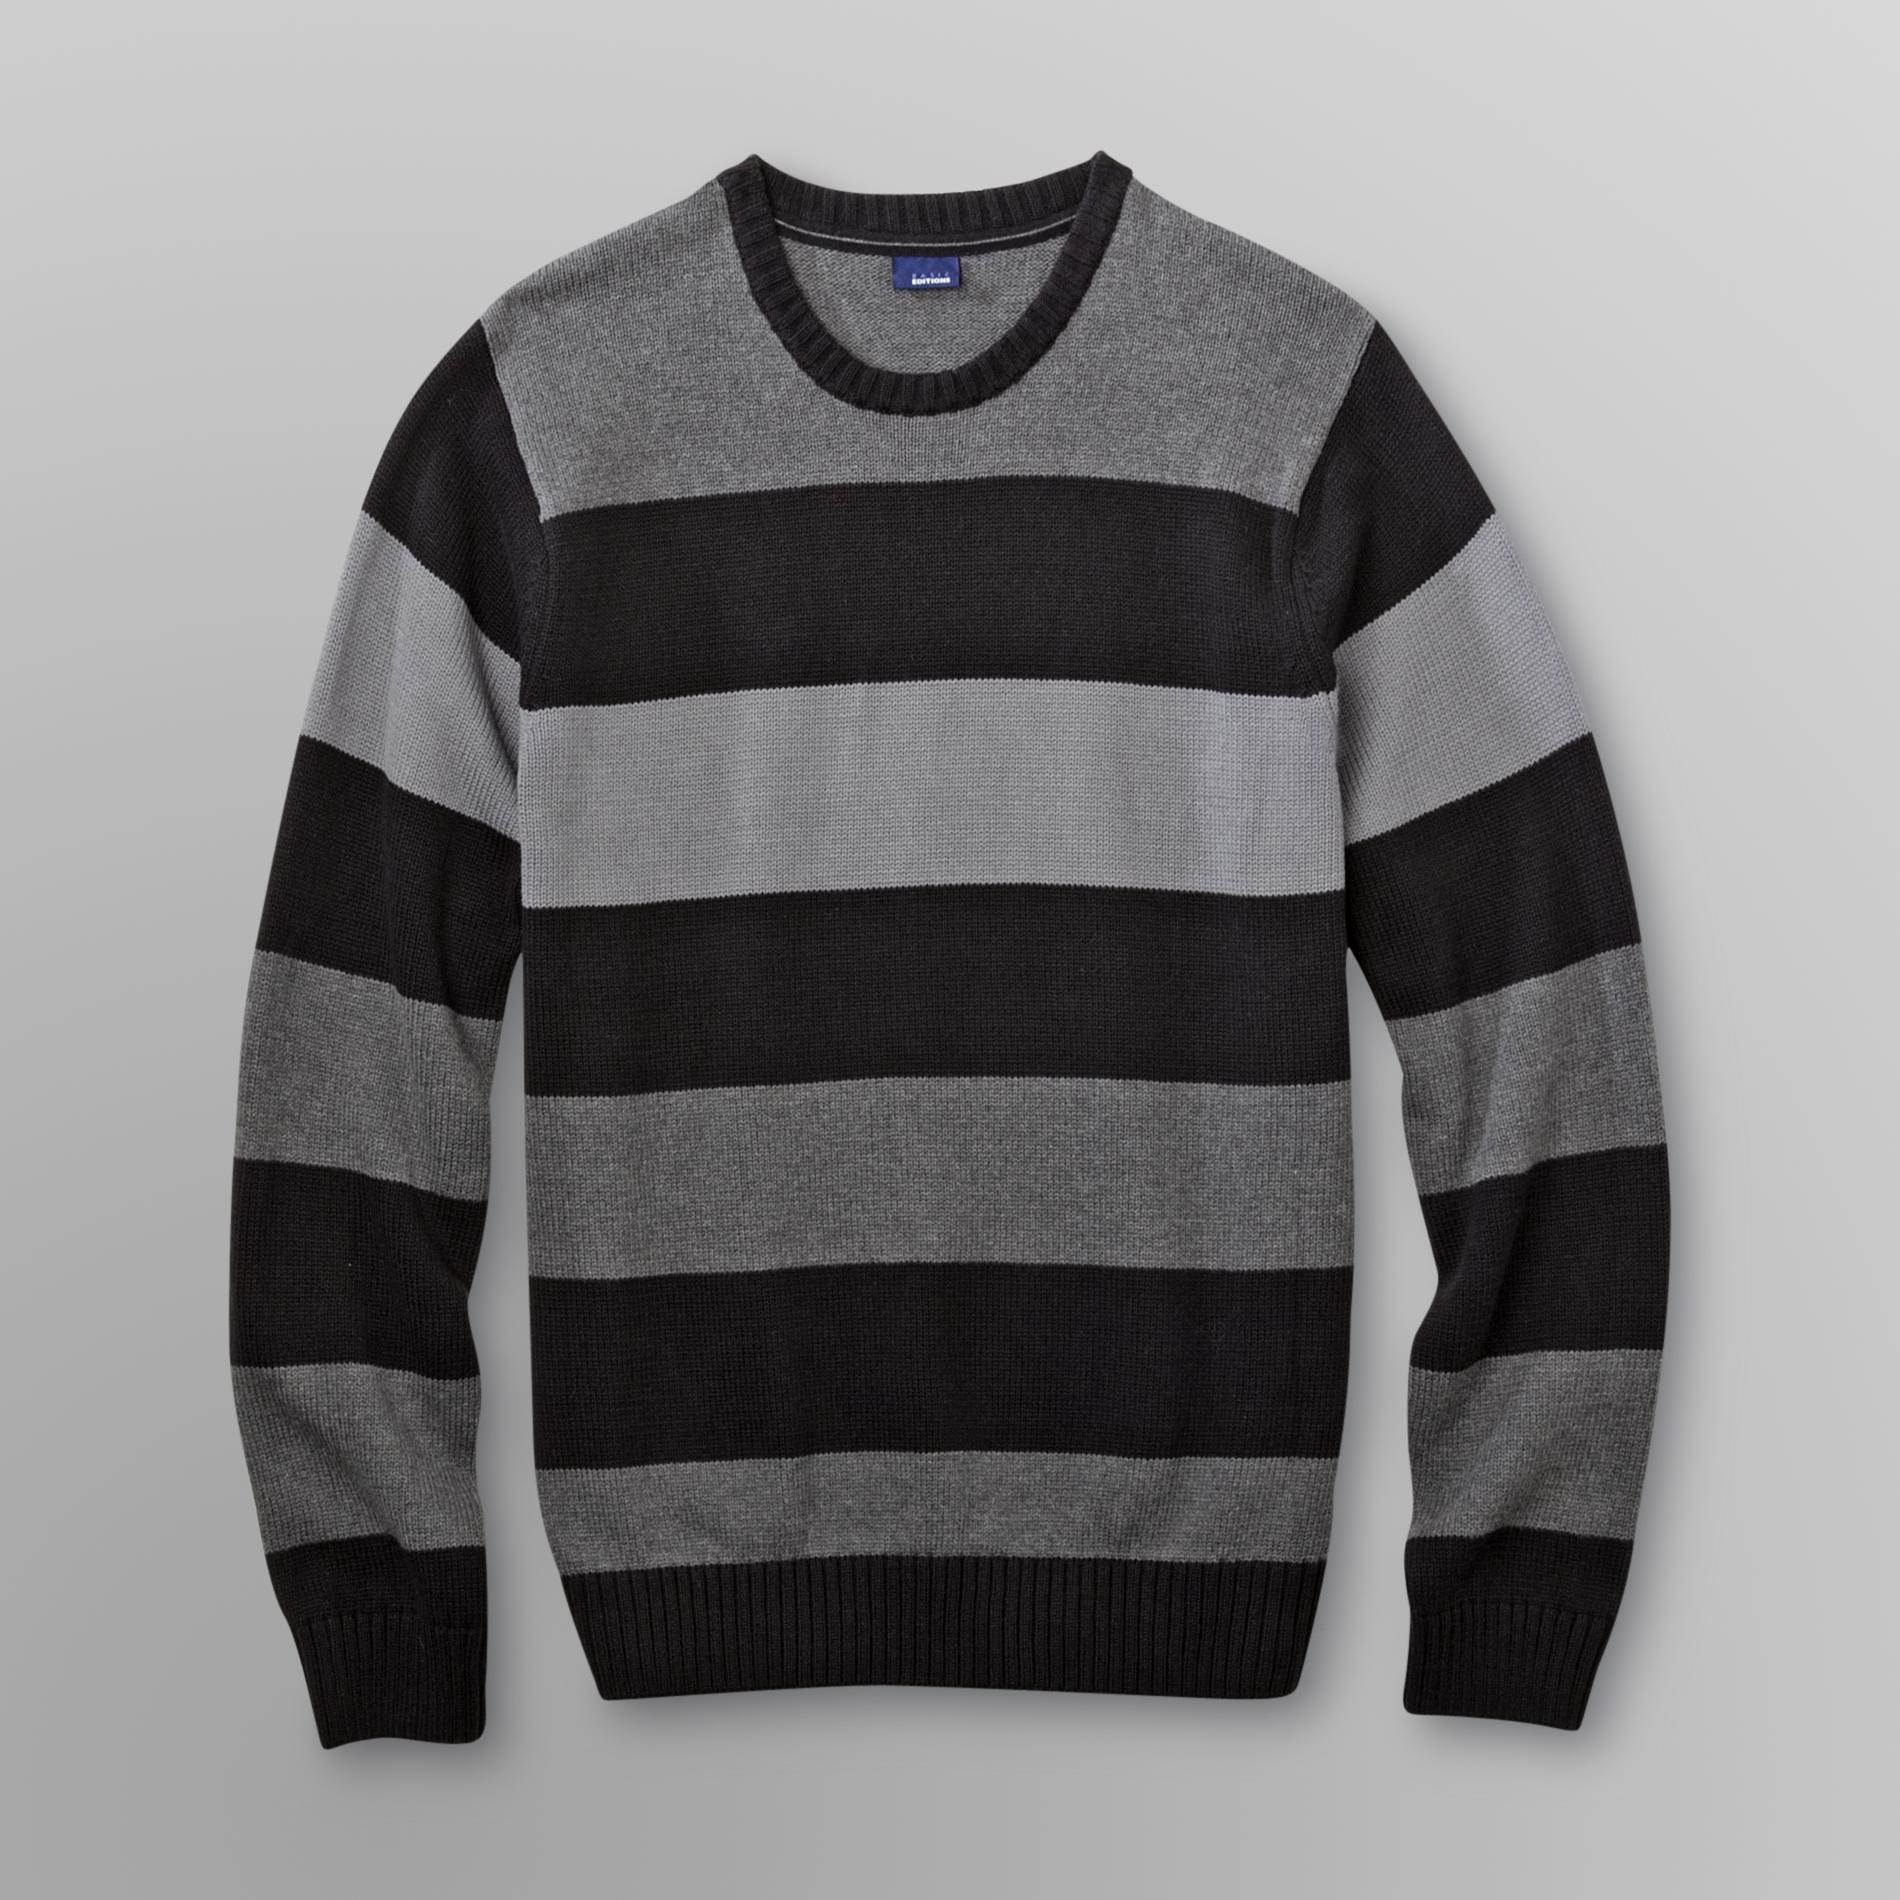 Basic Editions Men's Sweater - Striped